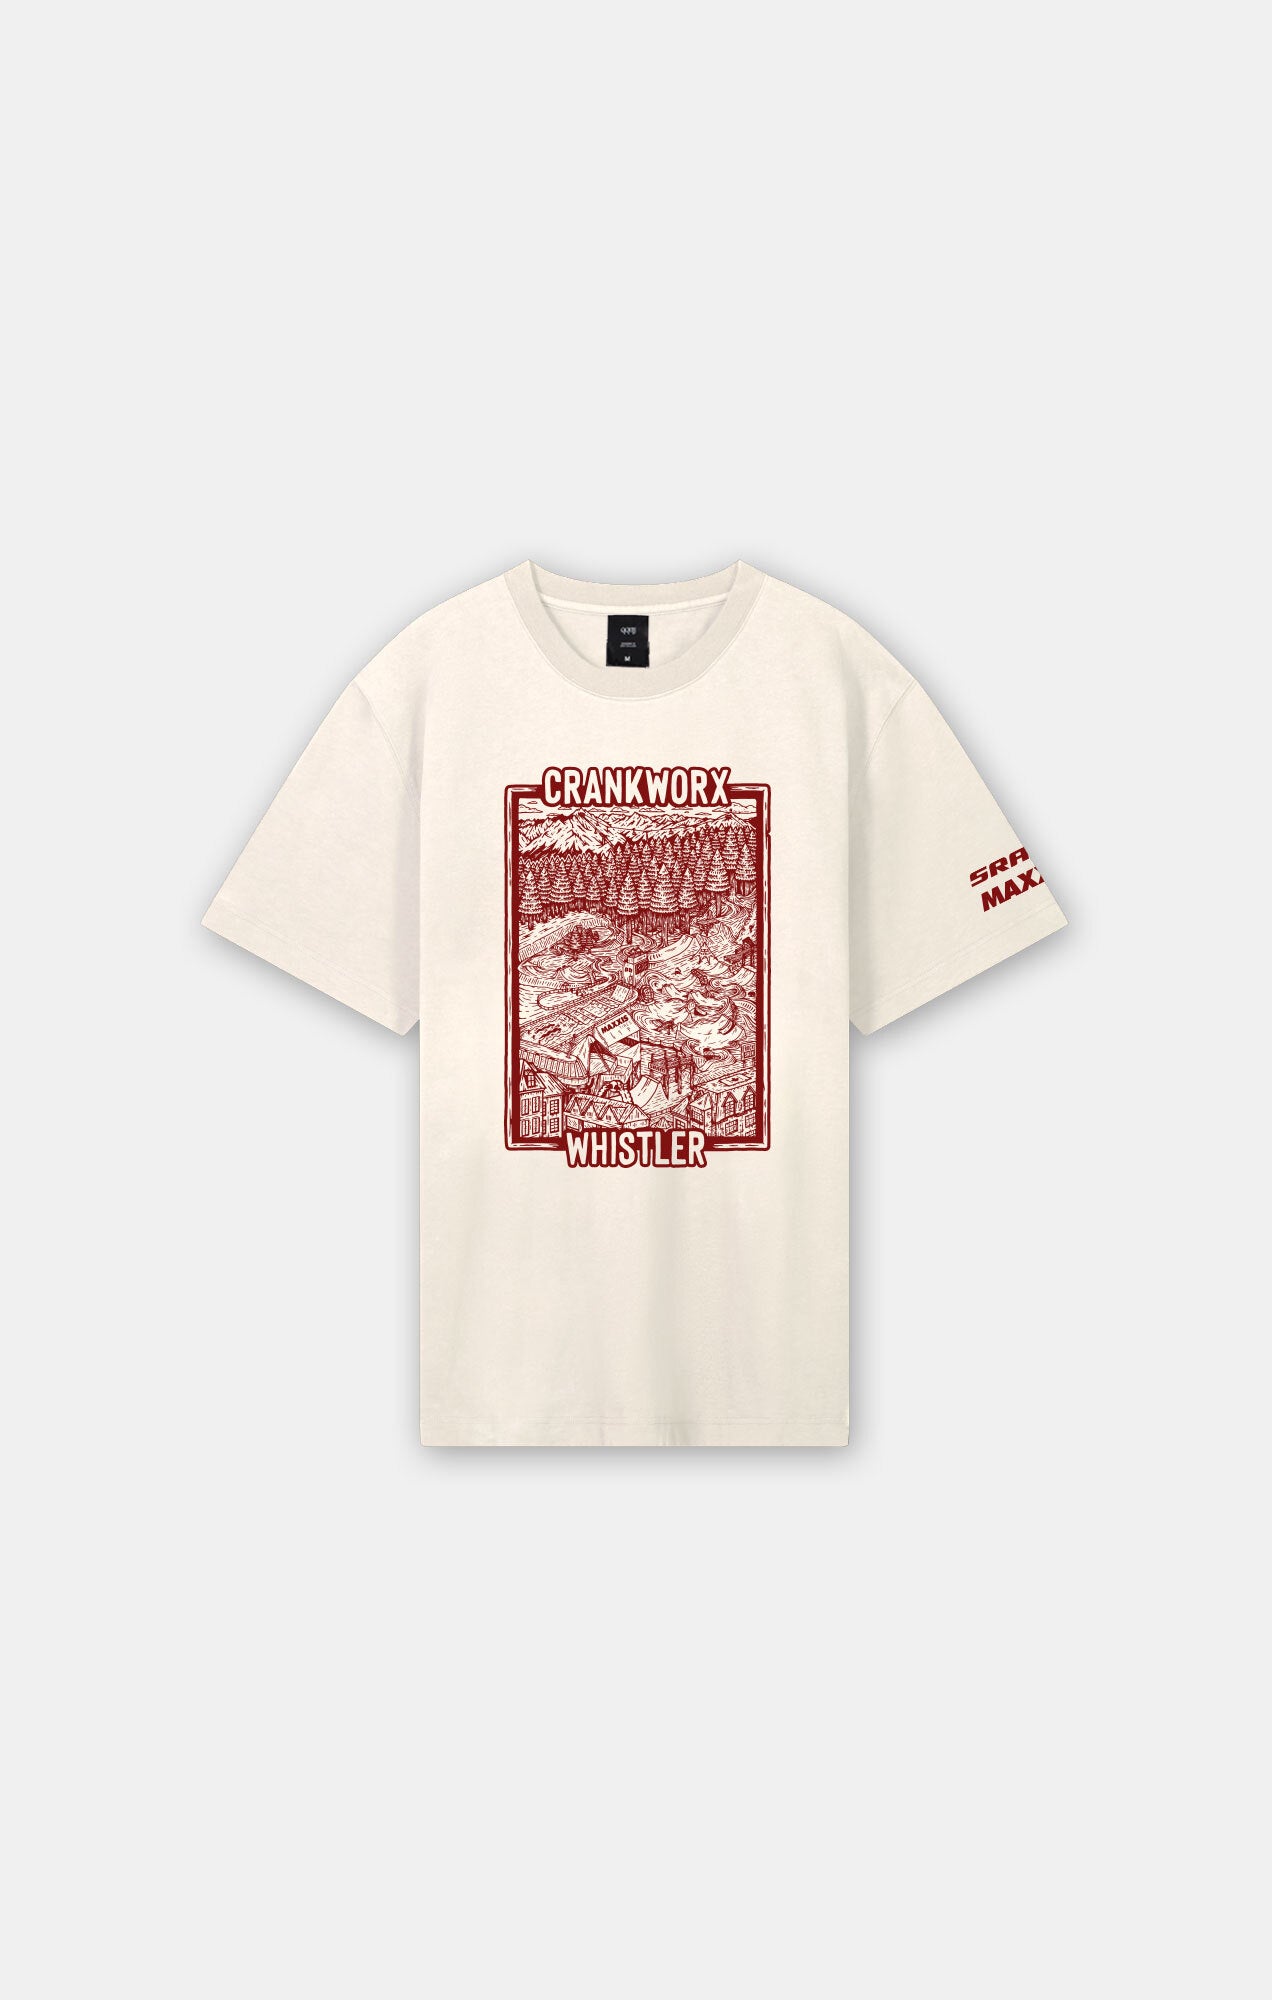 CW WHISTLER EVENT TEE - YOUTH - ilabb Canada